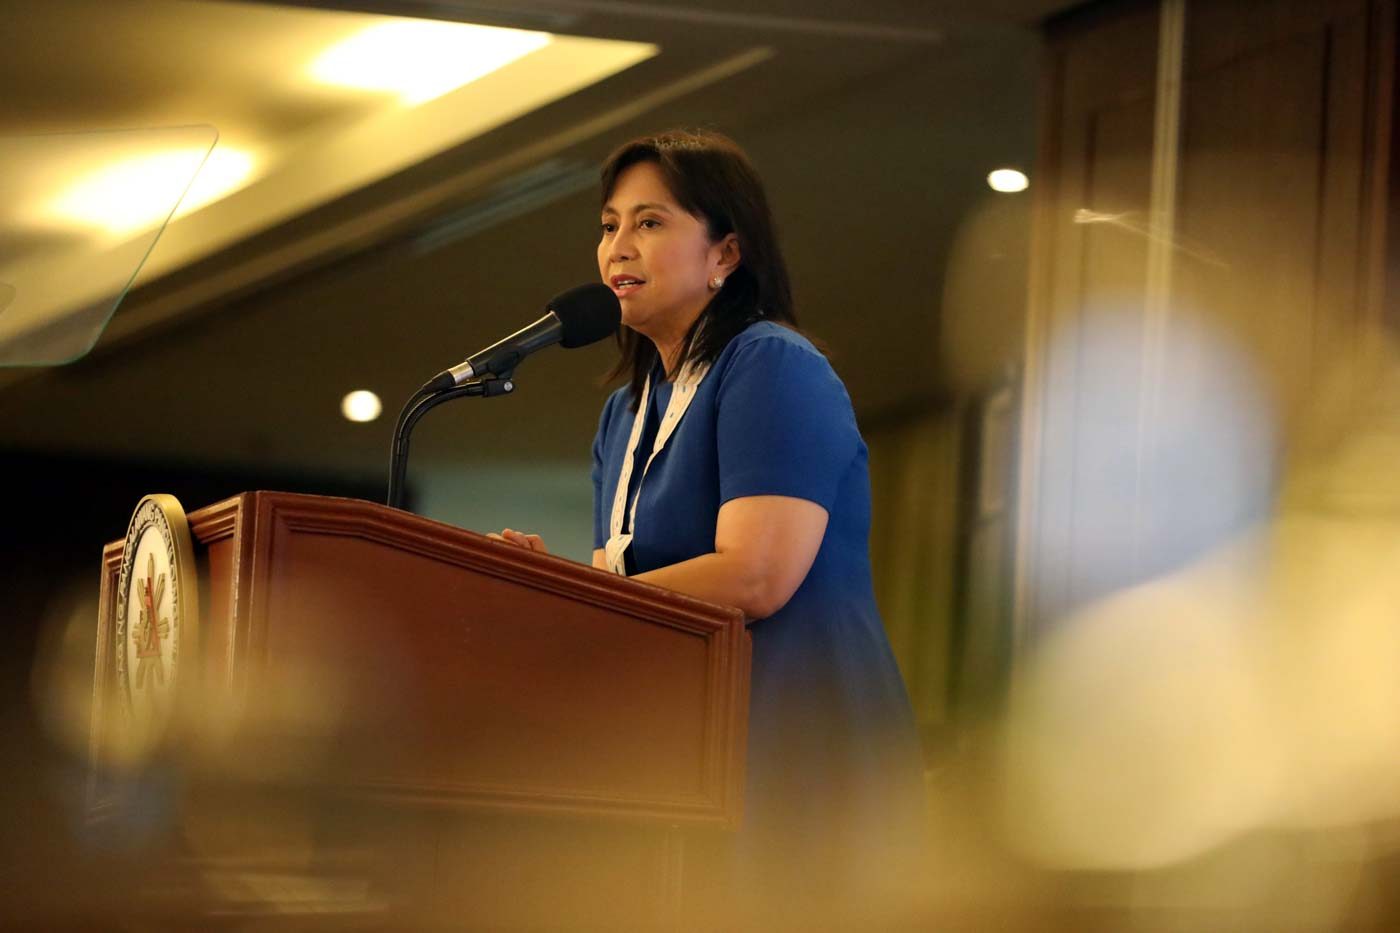 Robredo on Pisay controversy: Abuse vs women unacceptable in any form